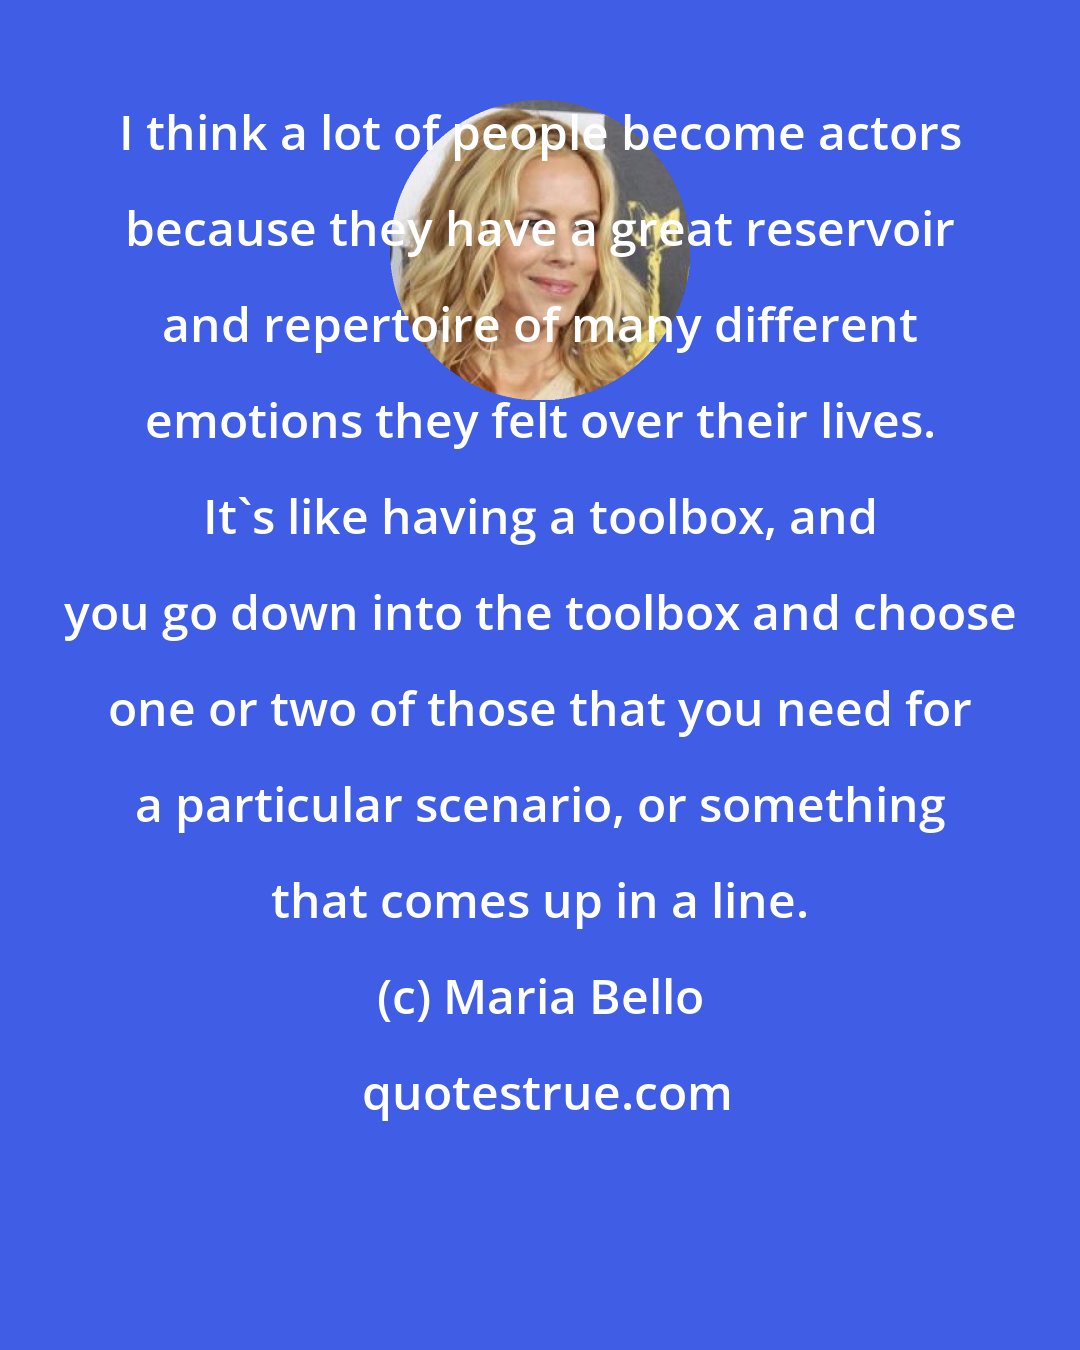 Maria Bello: I think a lot of people become actors because they have a great reservoir and repertoire of many different emotions they felt over their lives. It's like having a toolbox, and you go down into the toolbox and choose one or two of those that you need for a particular scenario, or something that comes up in a line.